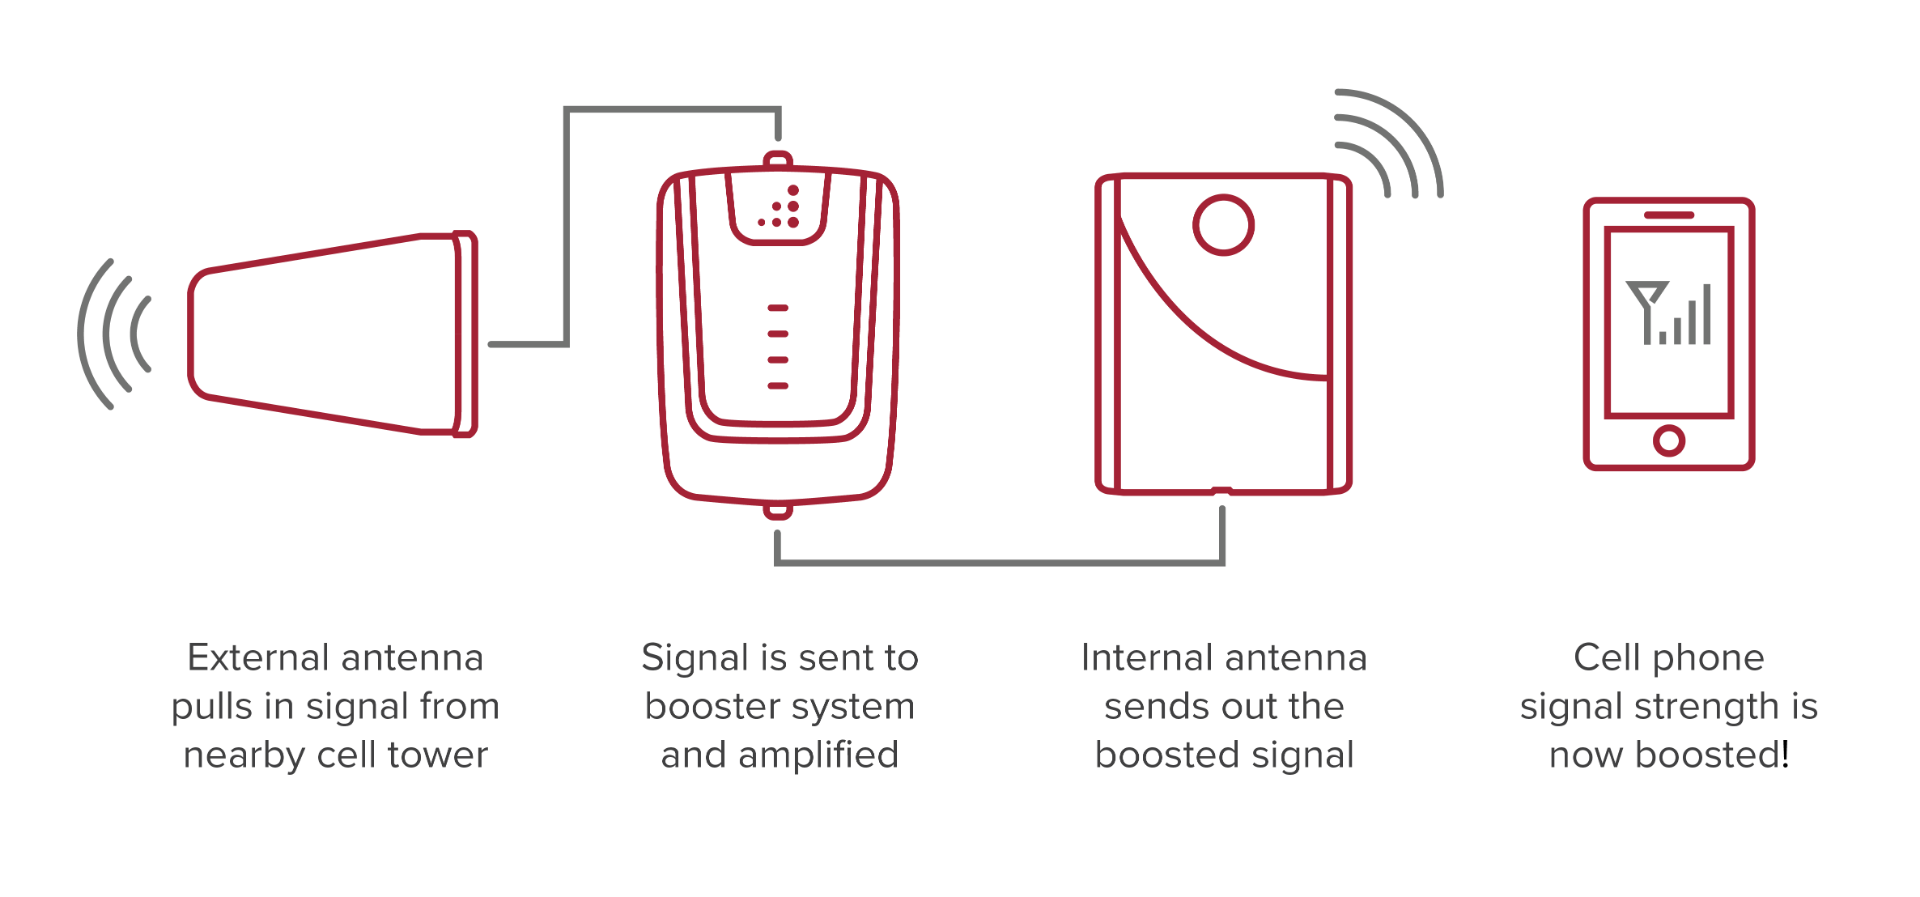 How a cell signal booster works